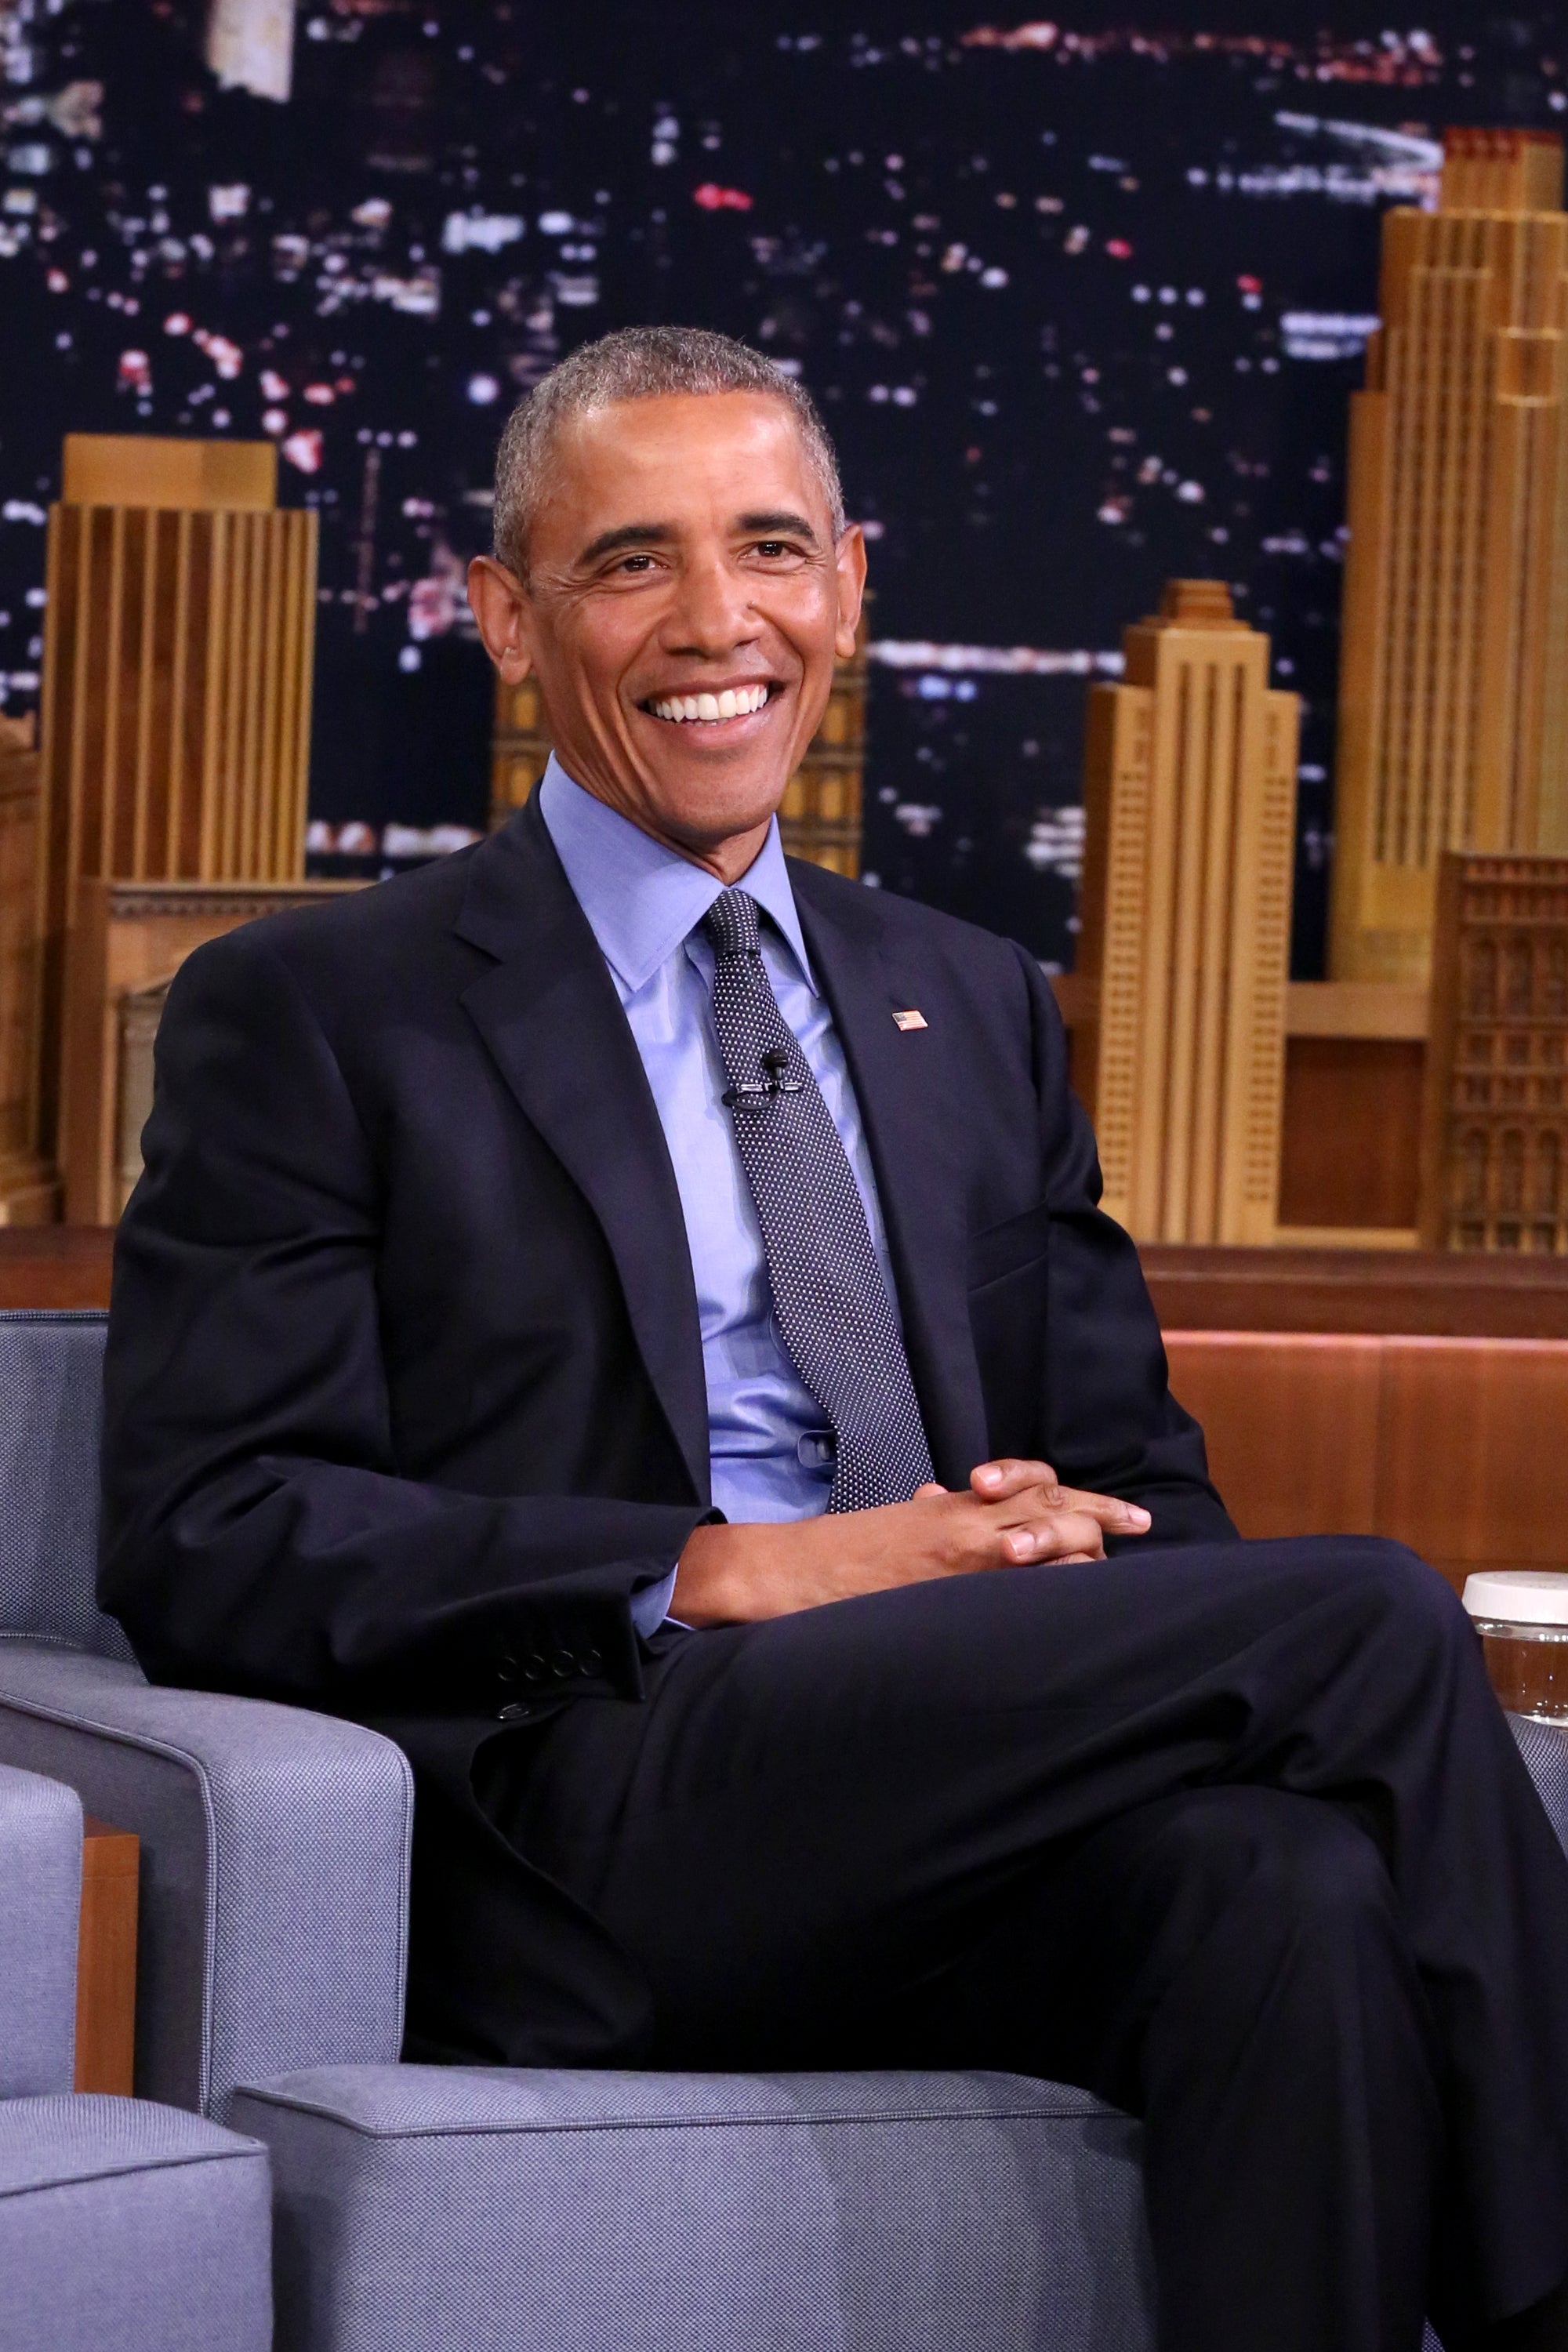 Obama Makes Final 'Daily Show' Appearance, Says Trump May As Well Be 'Flying Blind'
